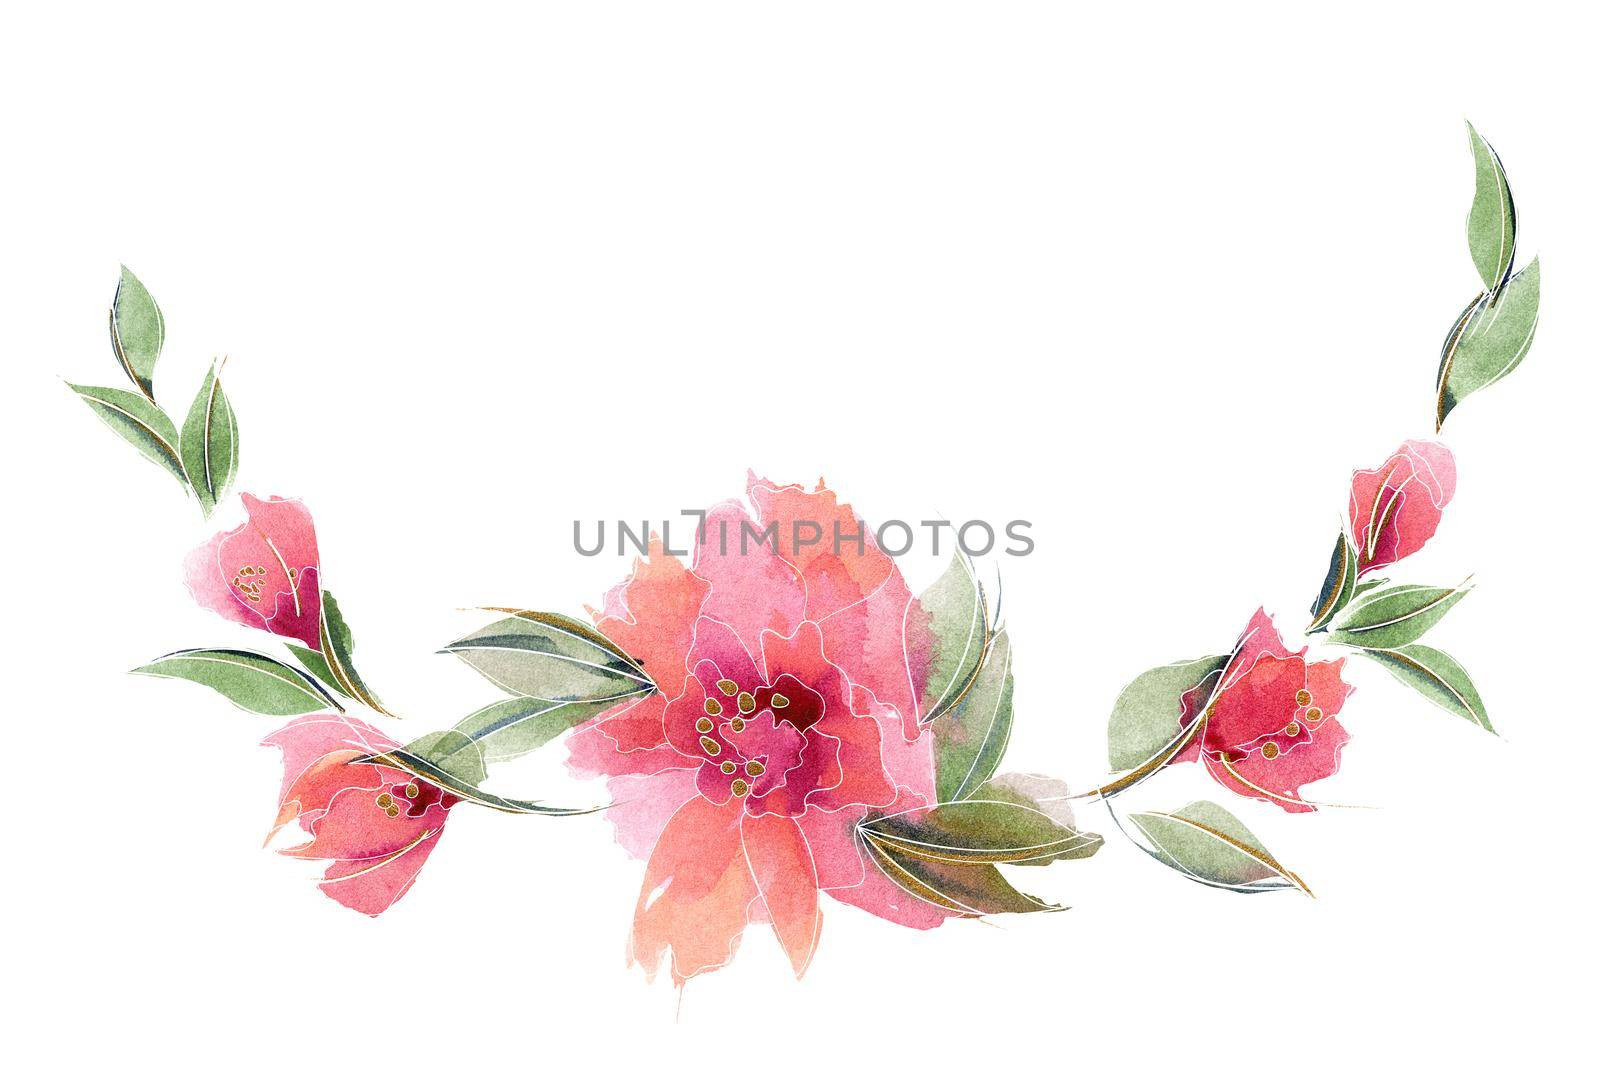 Pink floral ditsy rose garland. Spring mood with chaplet composition of watercolor delicate pink flowers